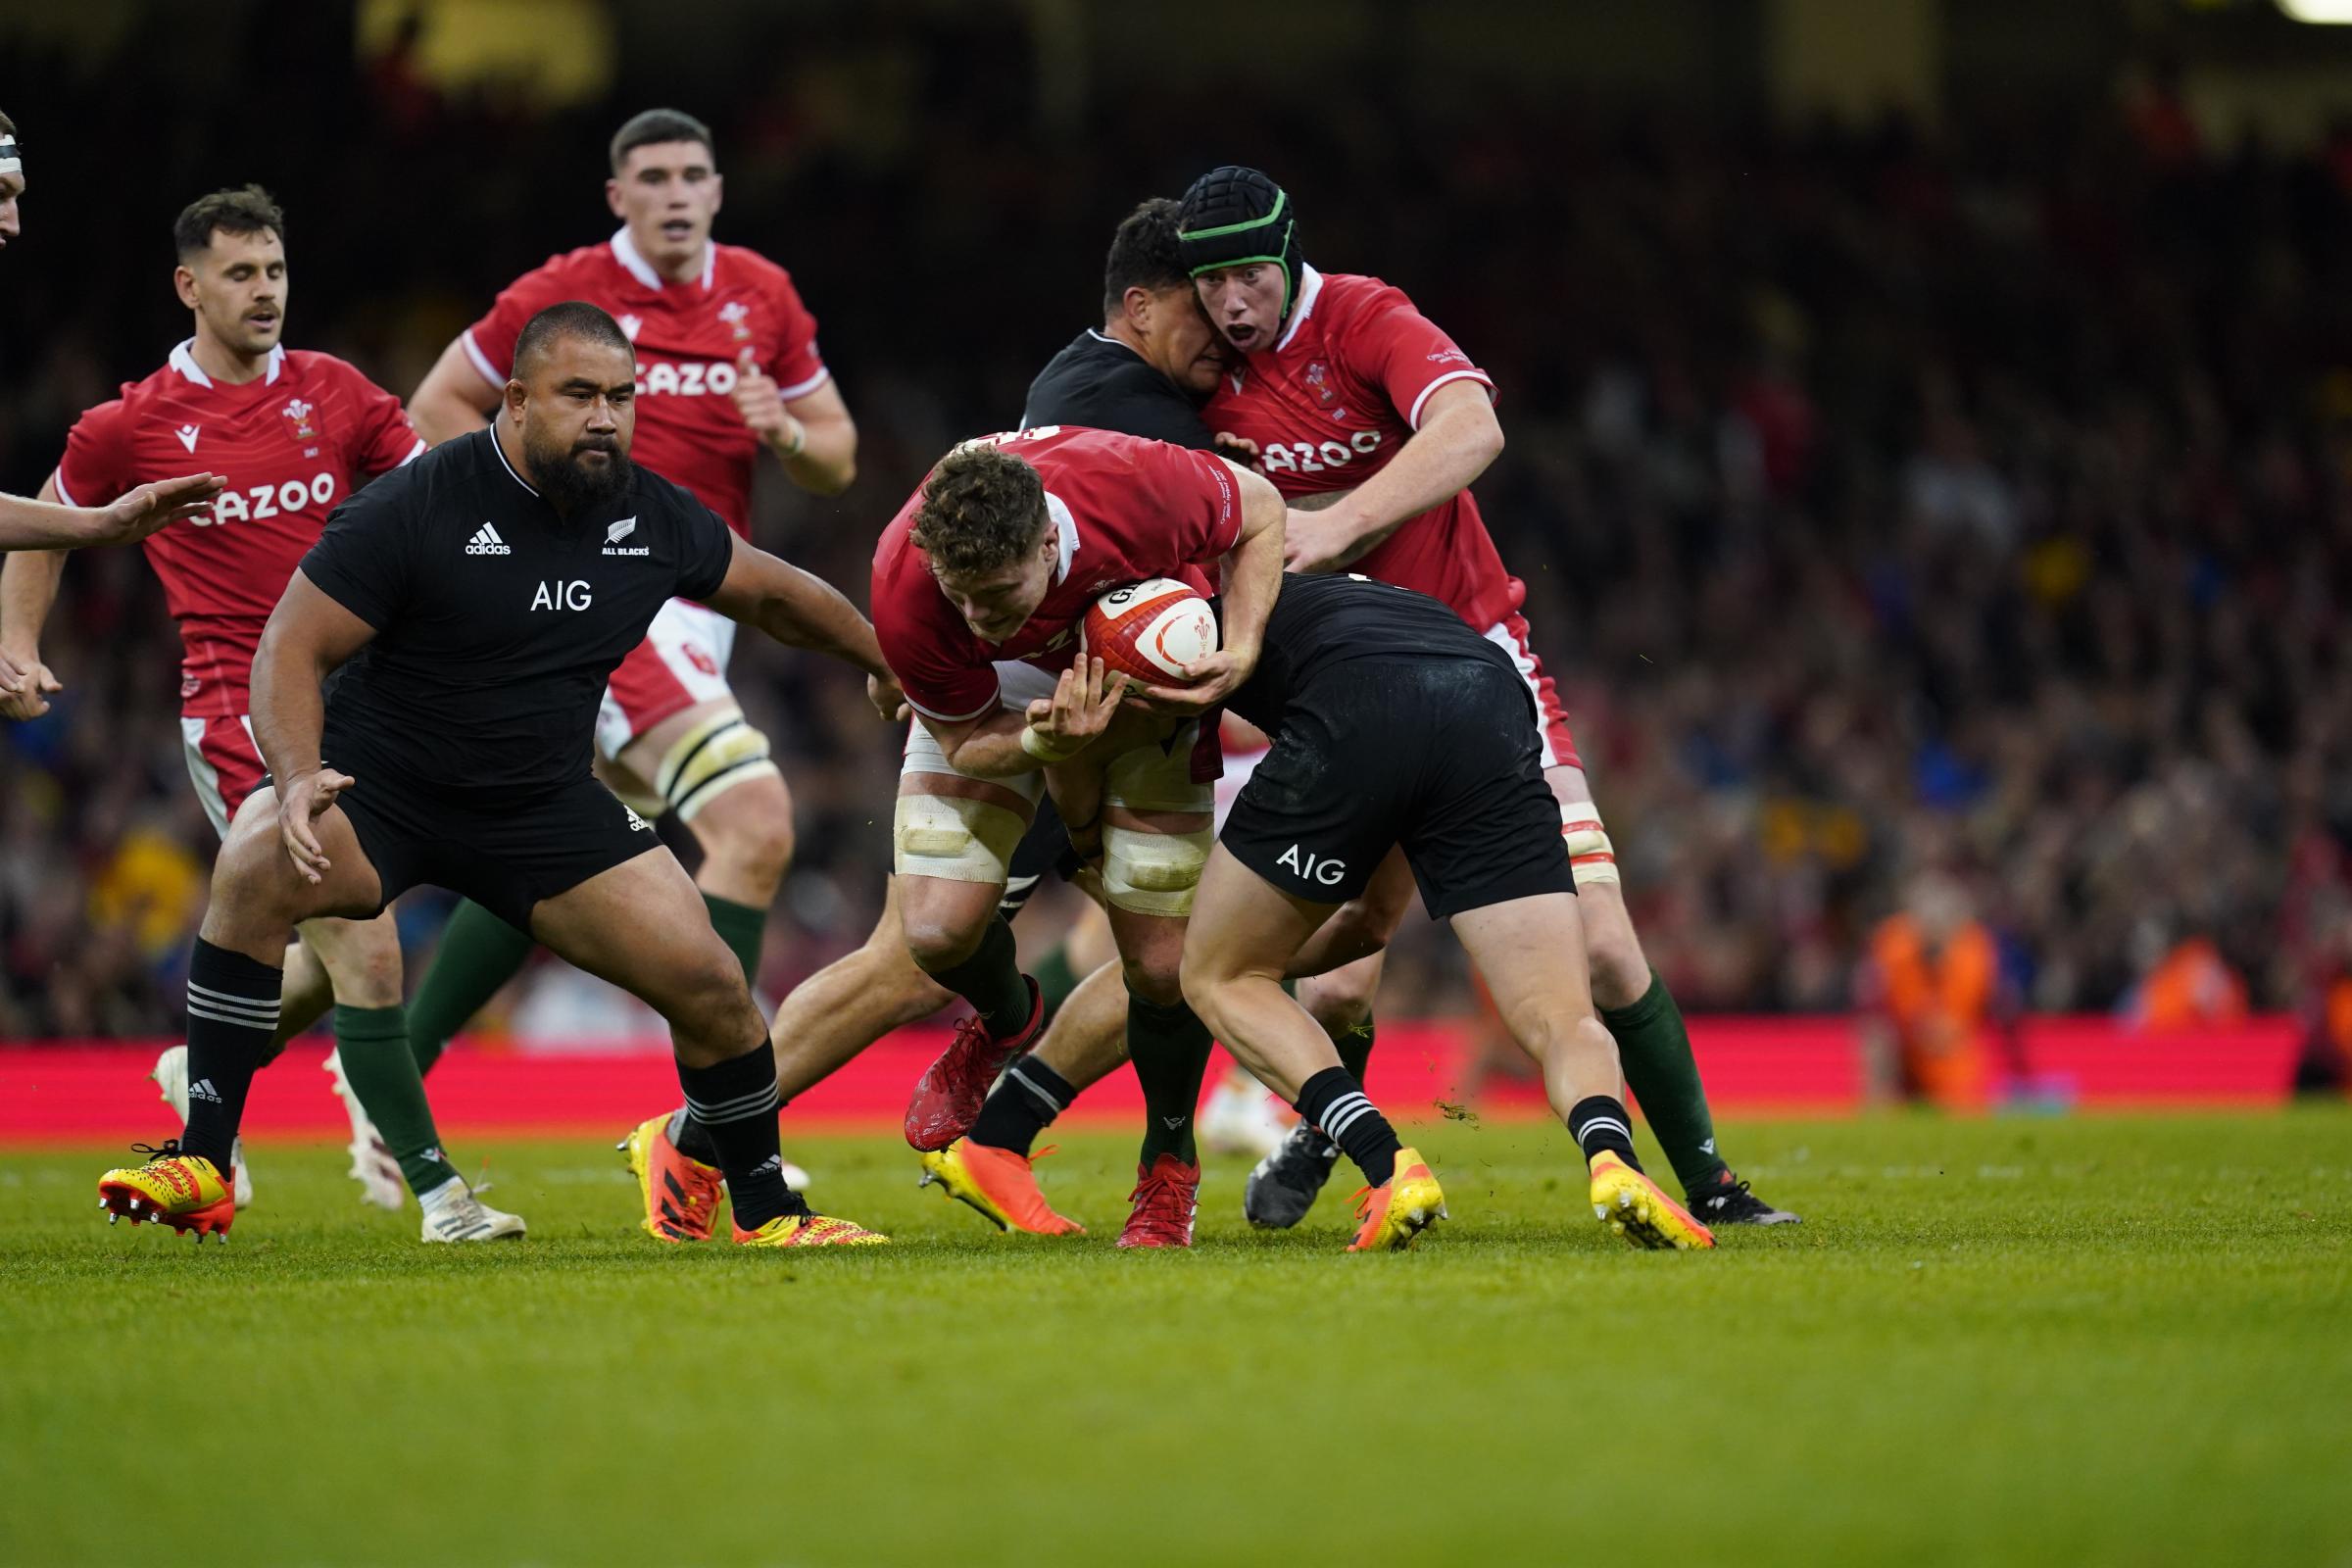 Dragons lock Will Rowlands carrying hard for Wales against New Zealand